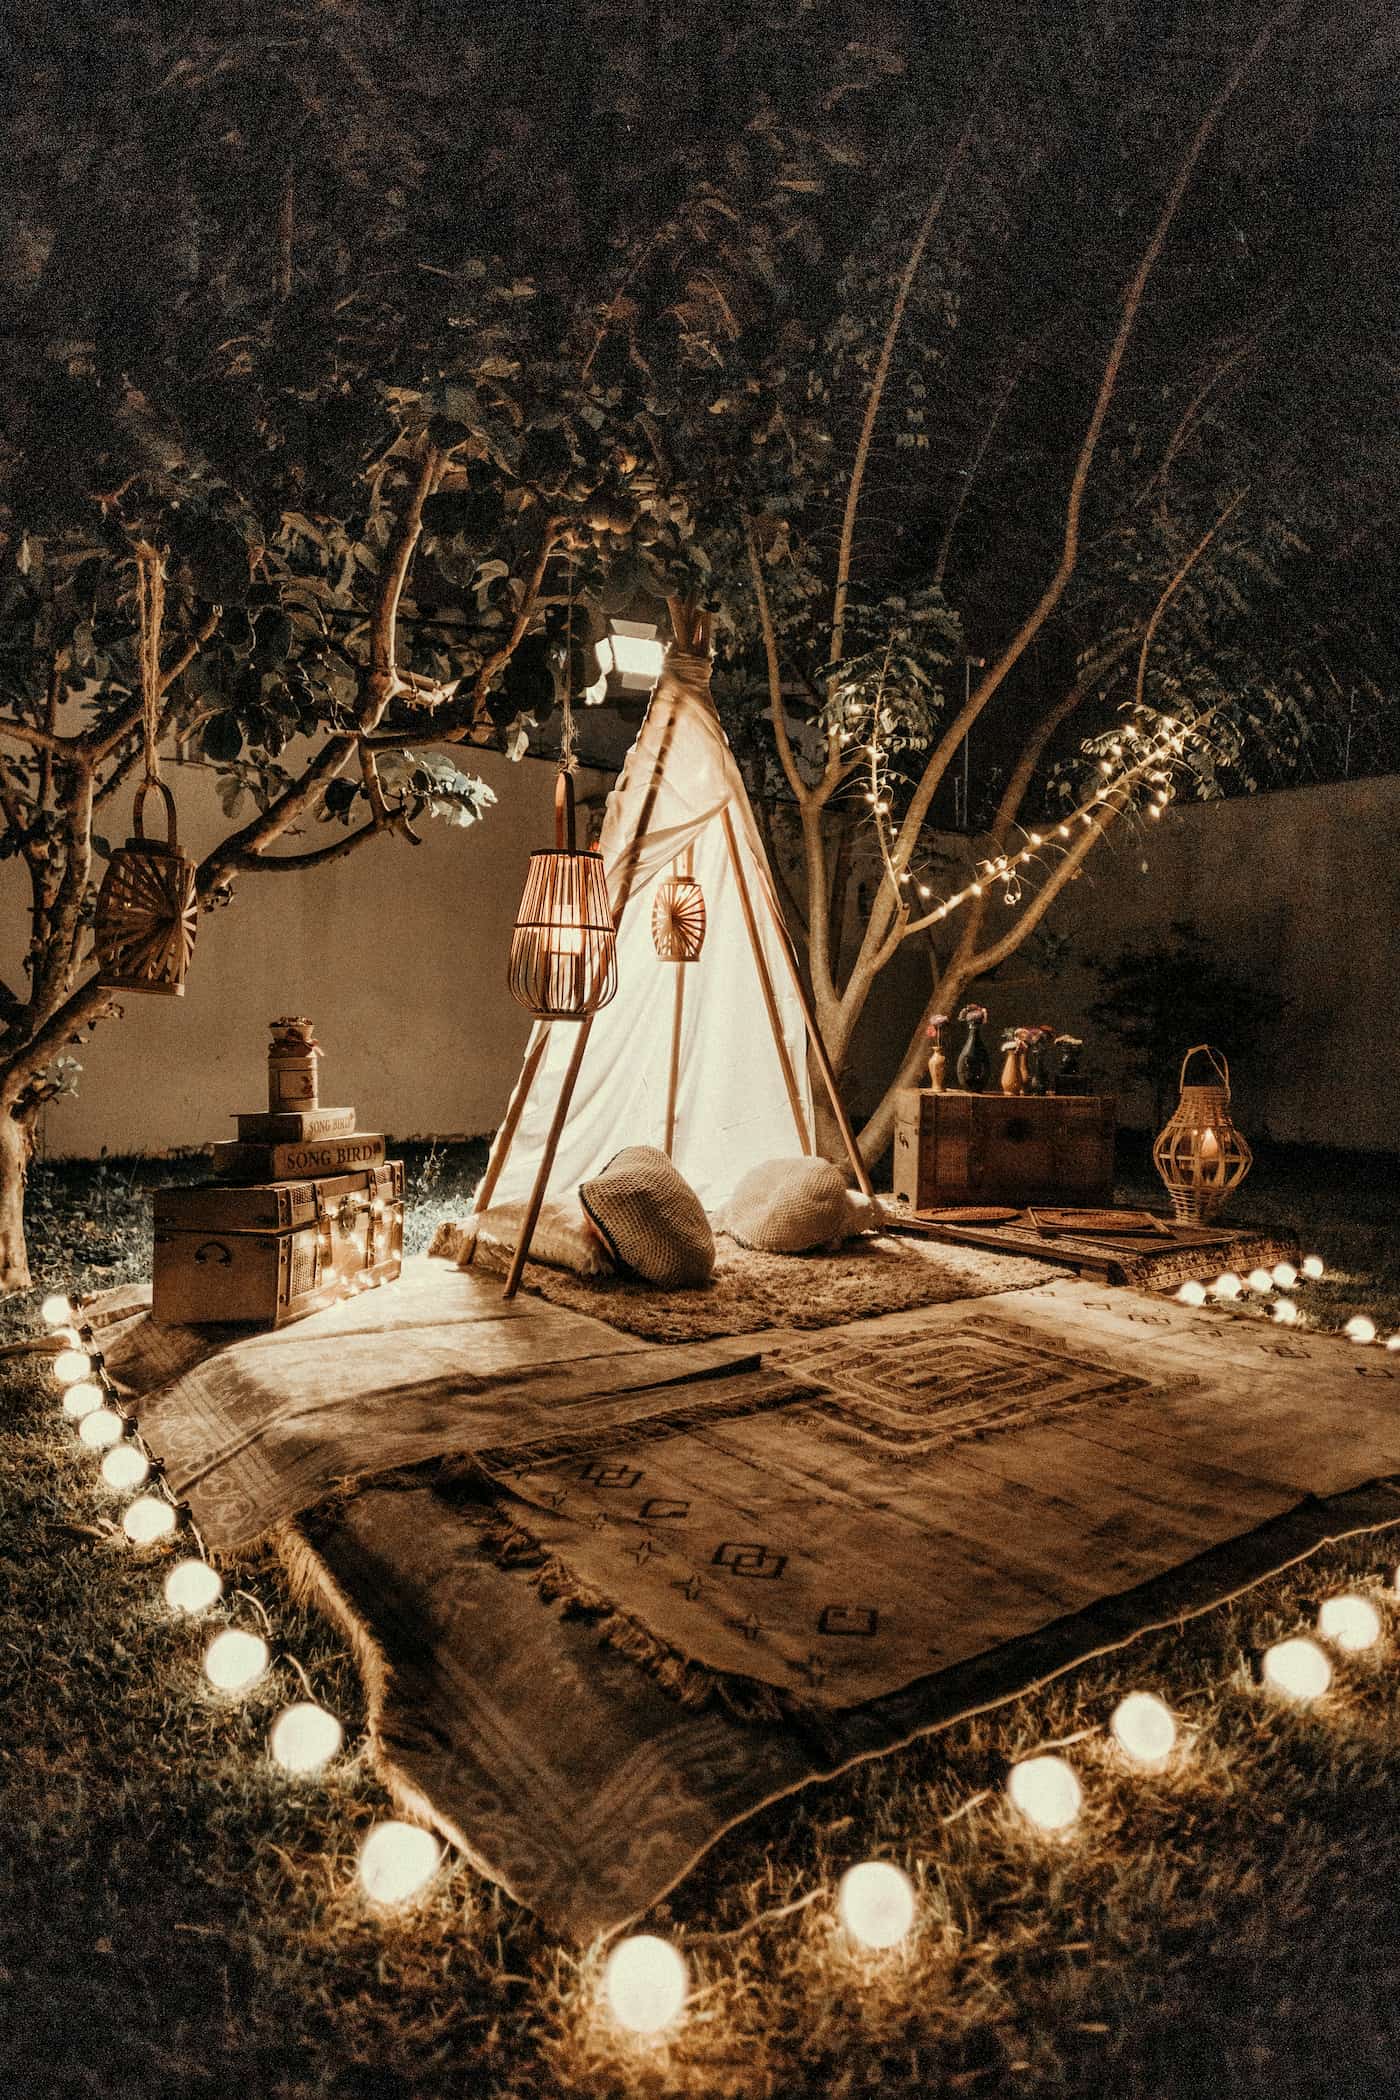 Glamping site setup in a backyard with lanterns and rugs.